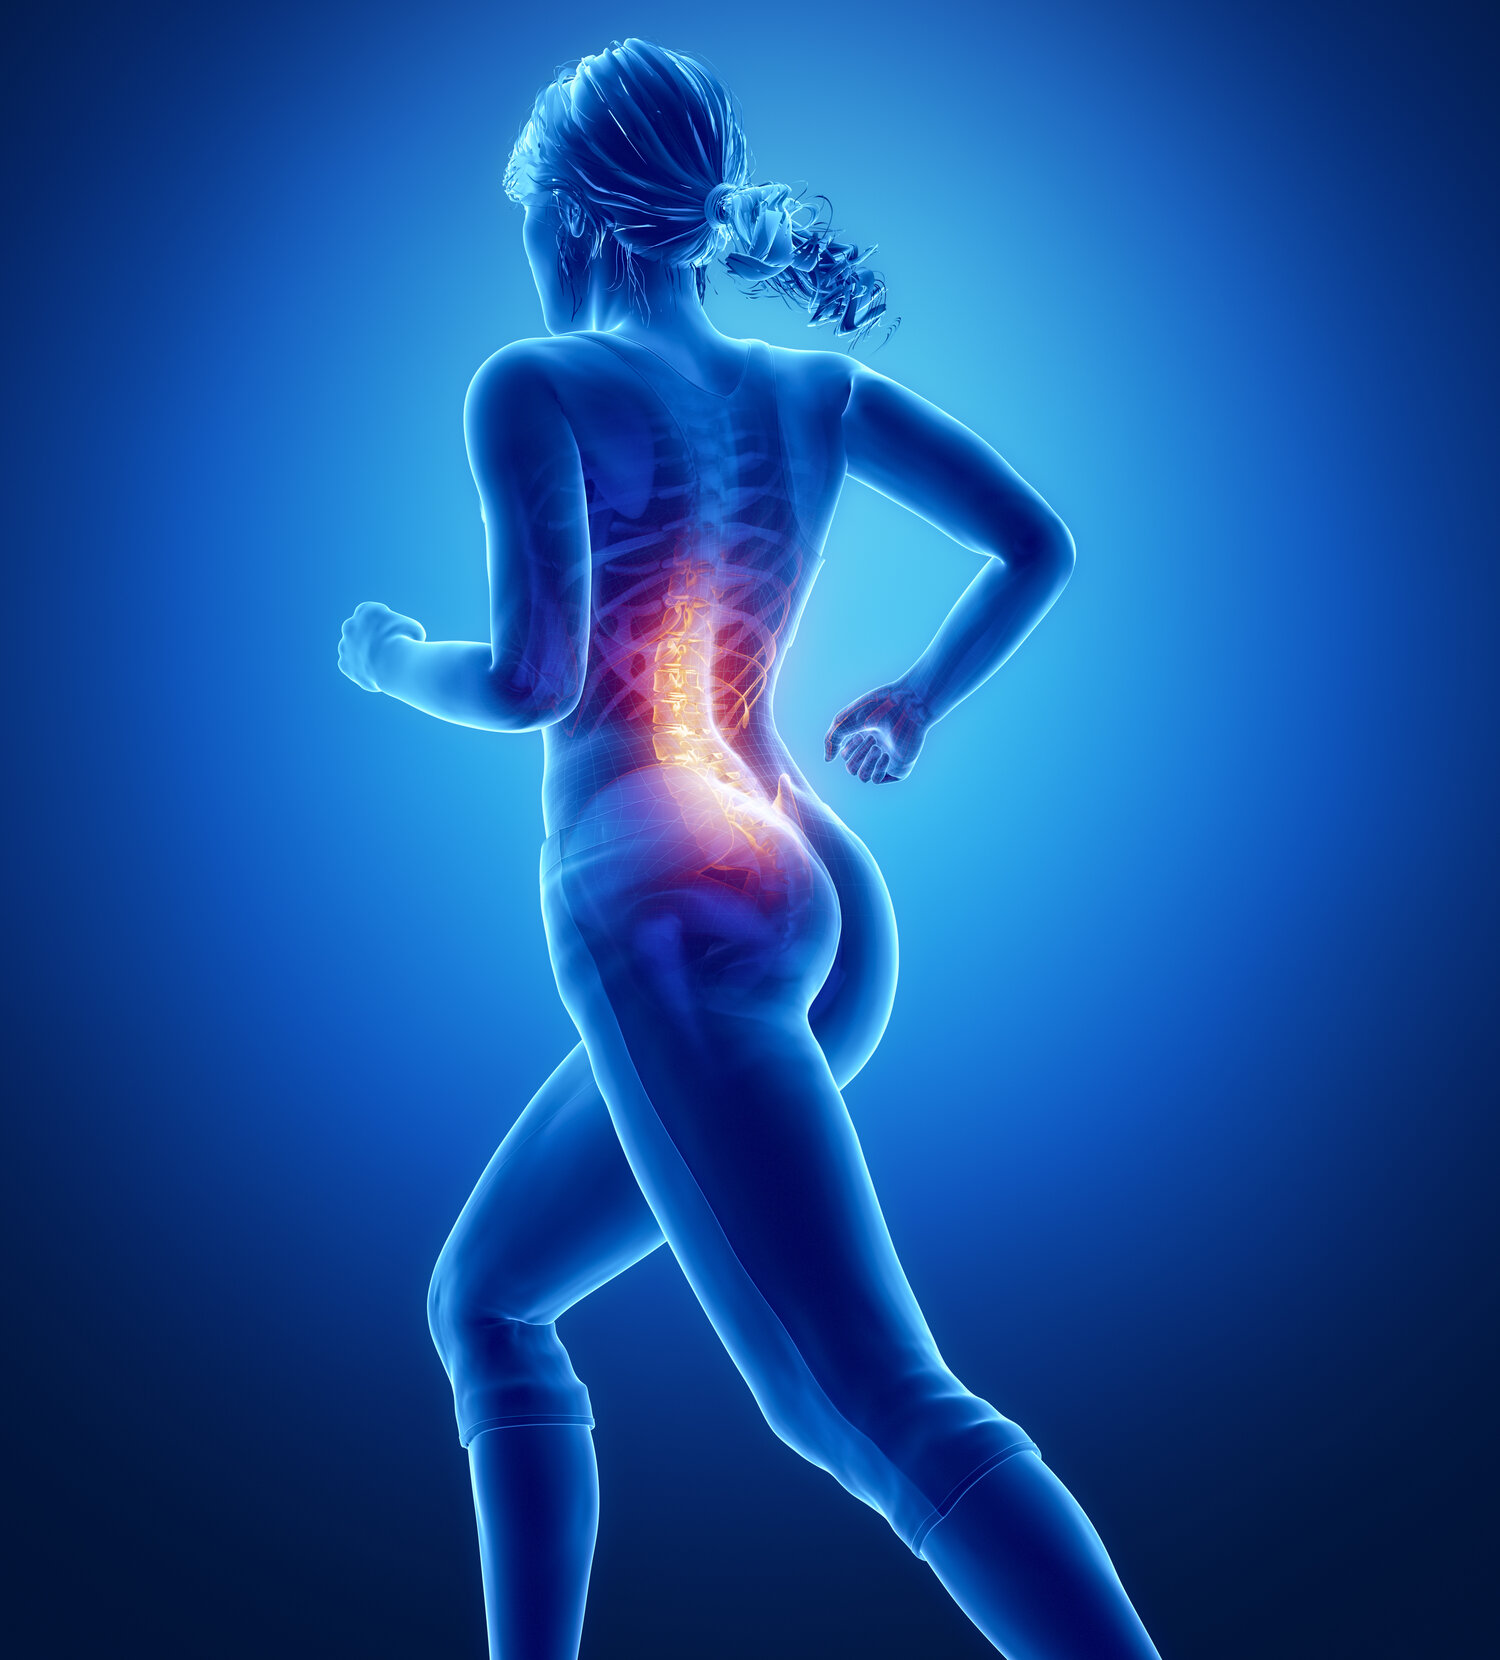 Lower Back Pain, Slipped Disc, Back Pain Relief, Back Pain Exercises